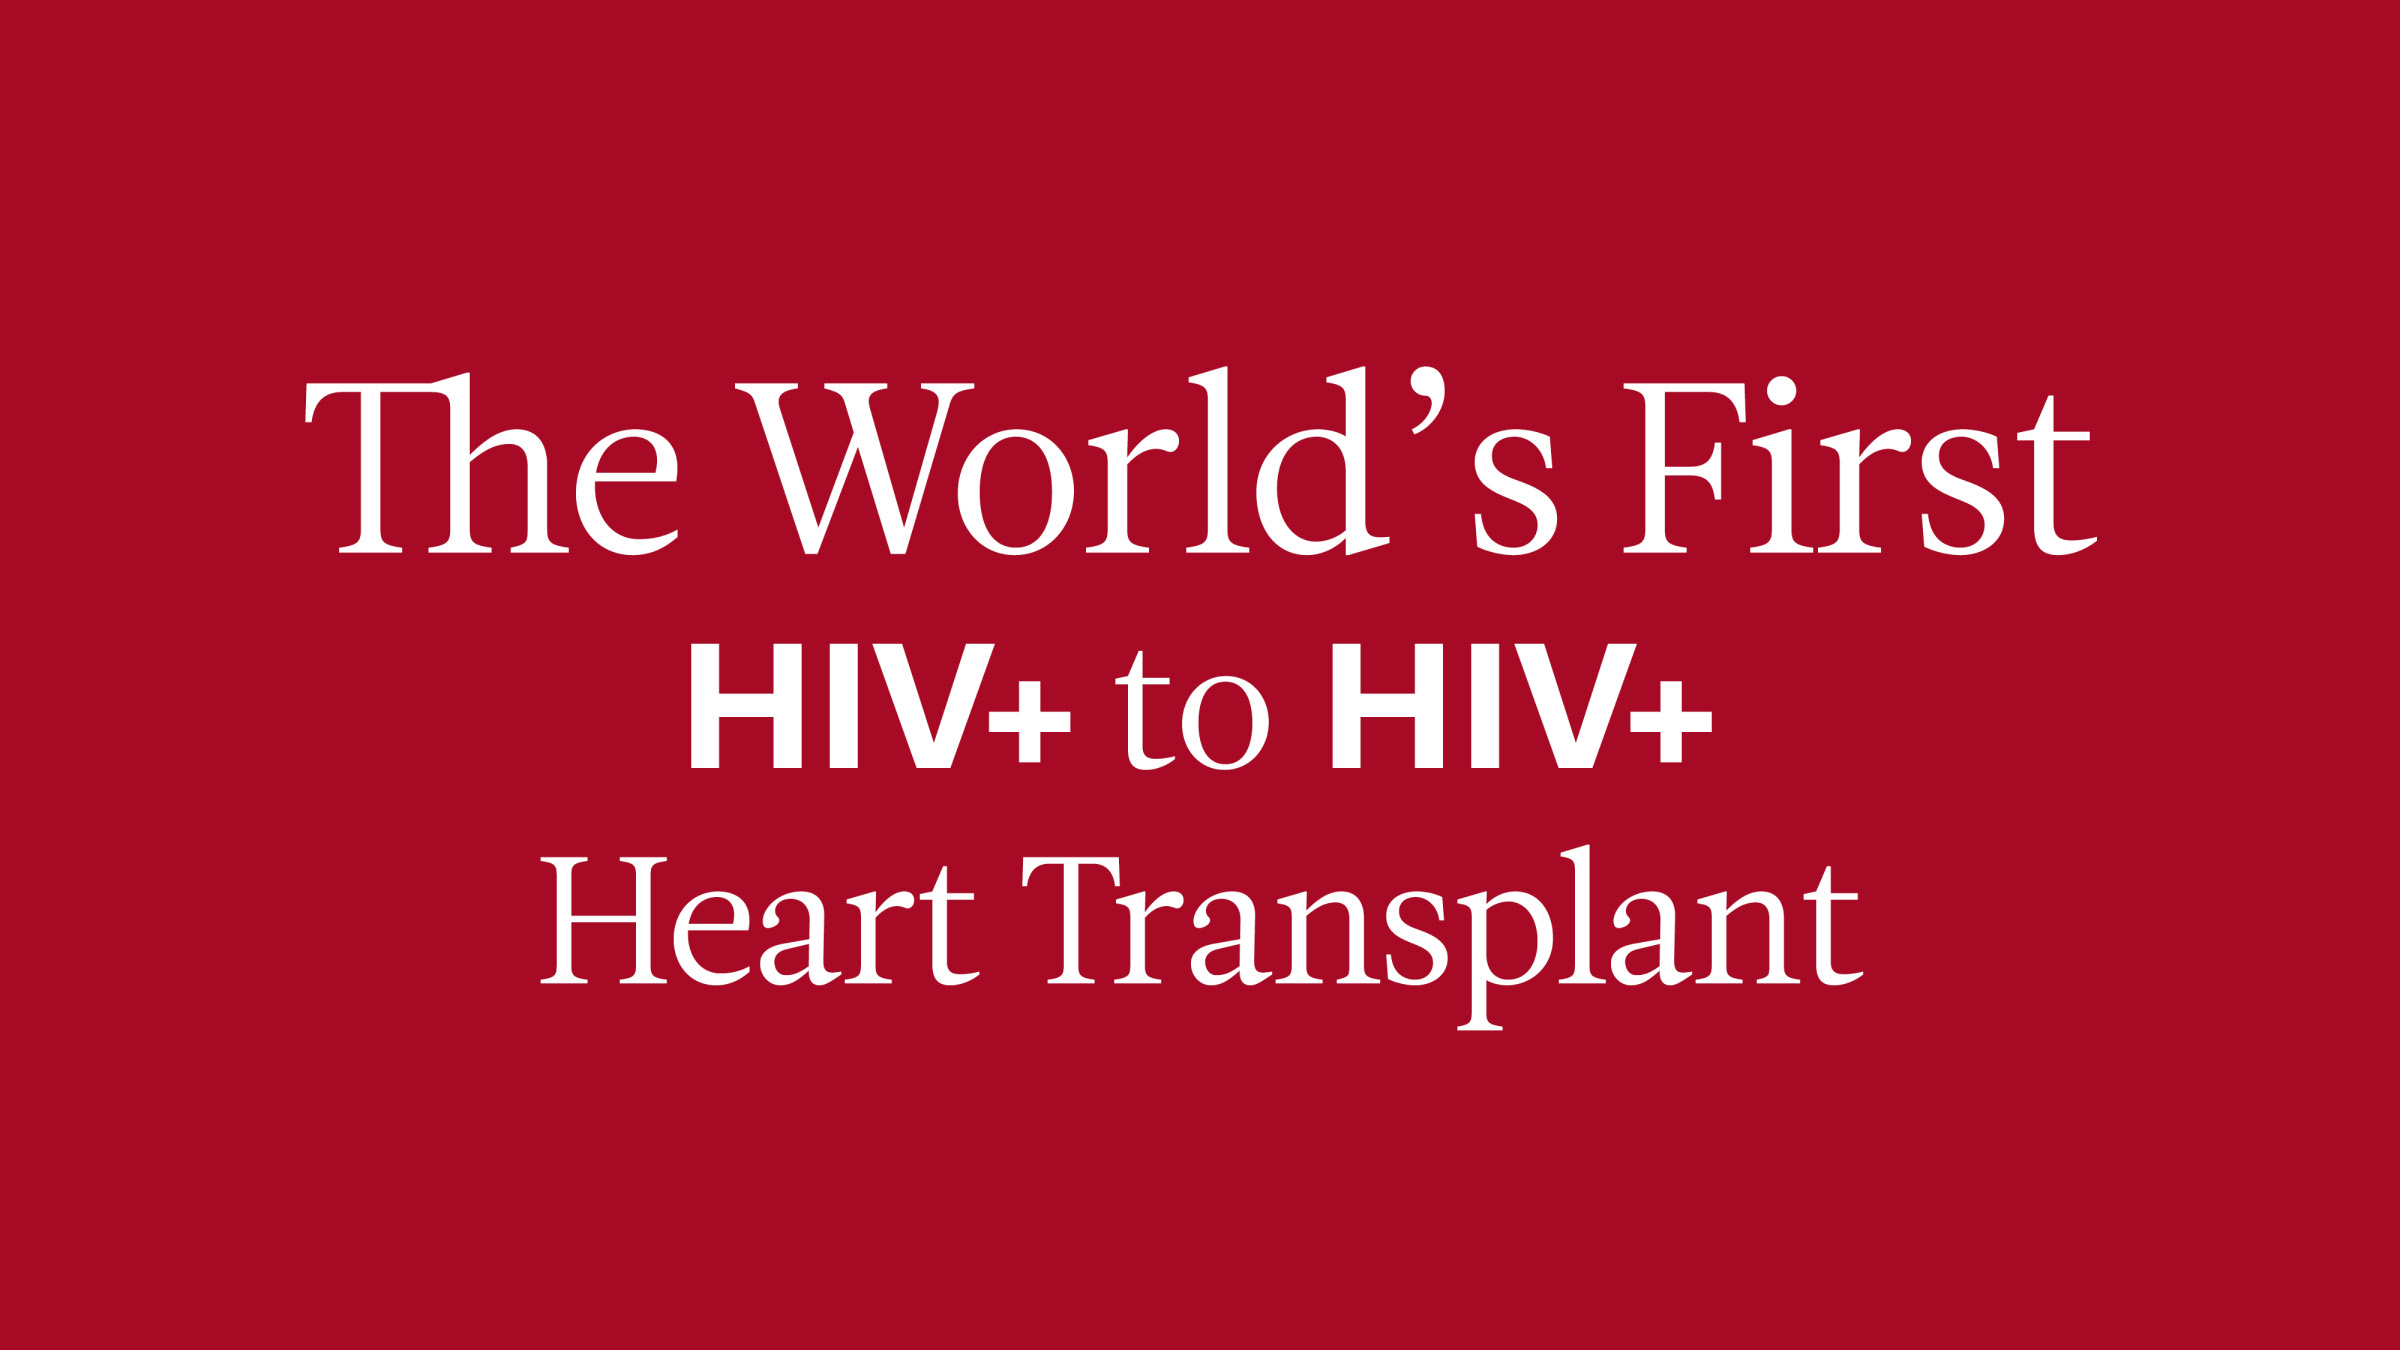 The world's first HIV to HIV heart transplant